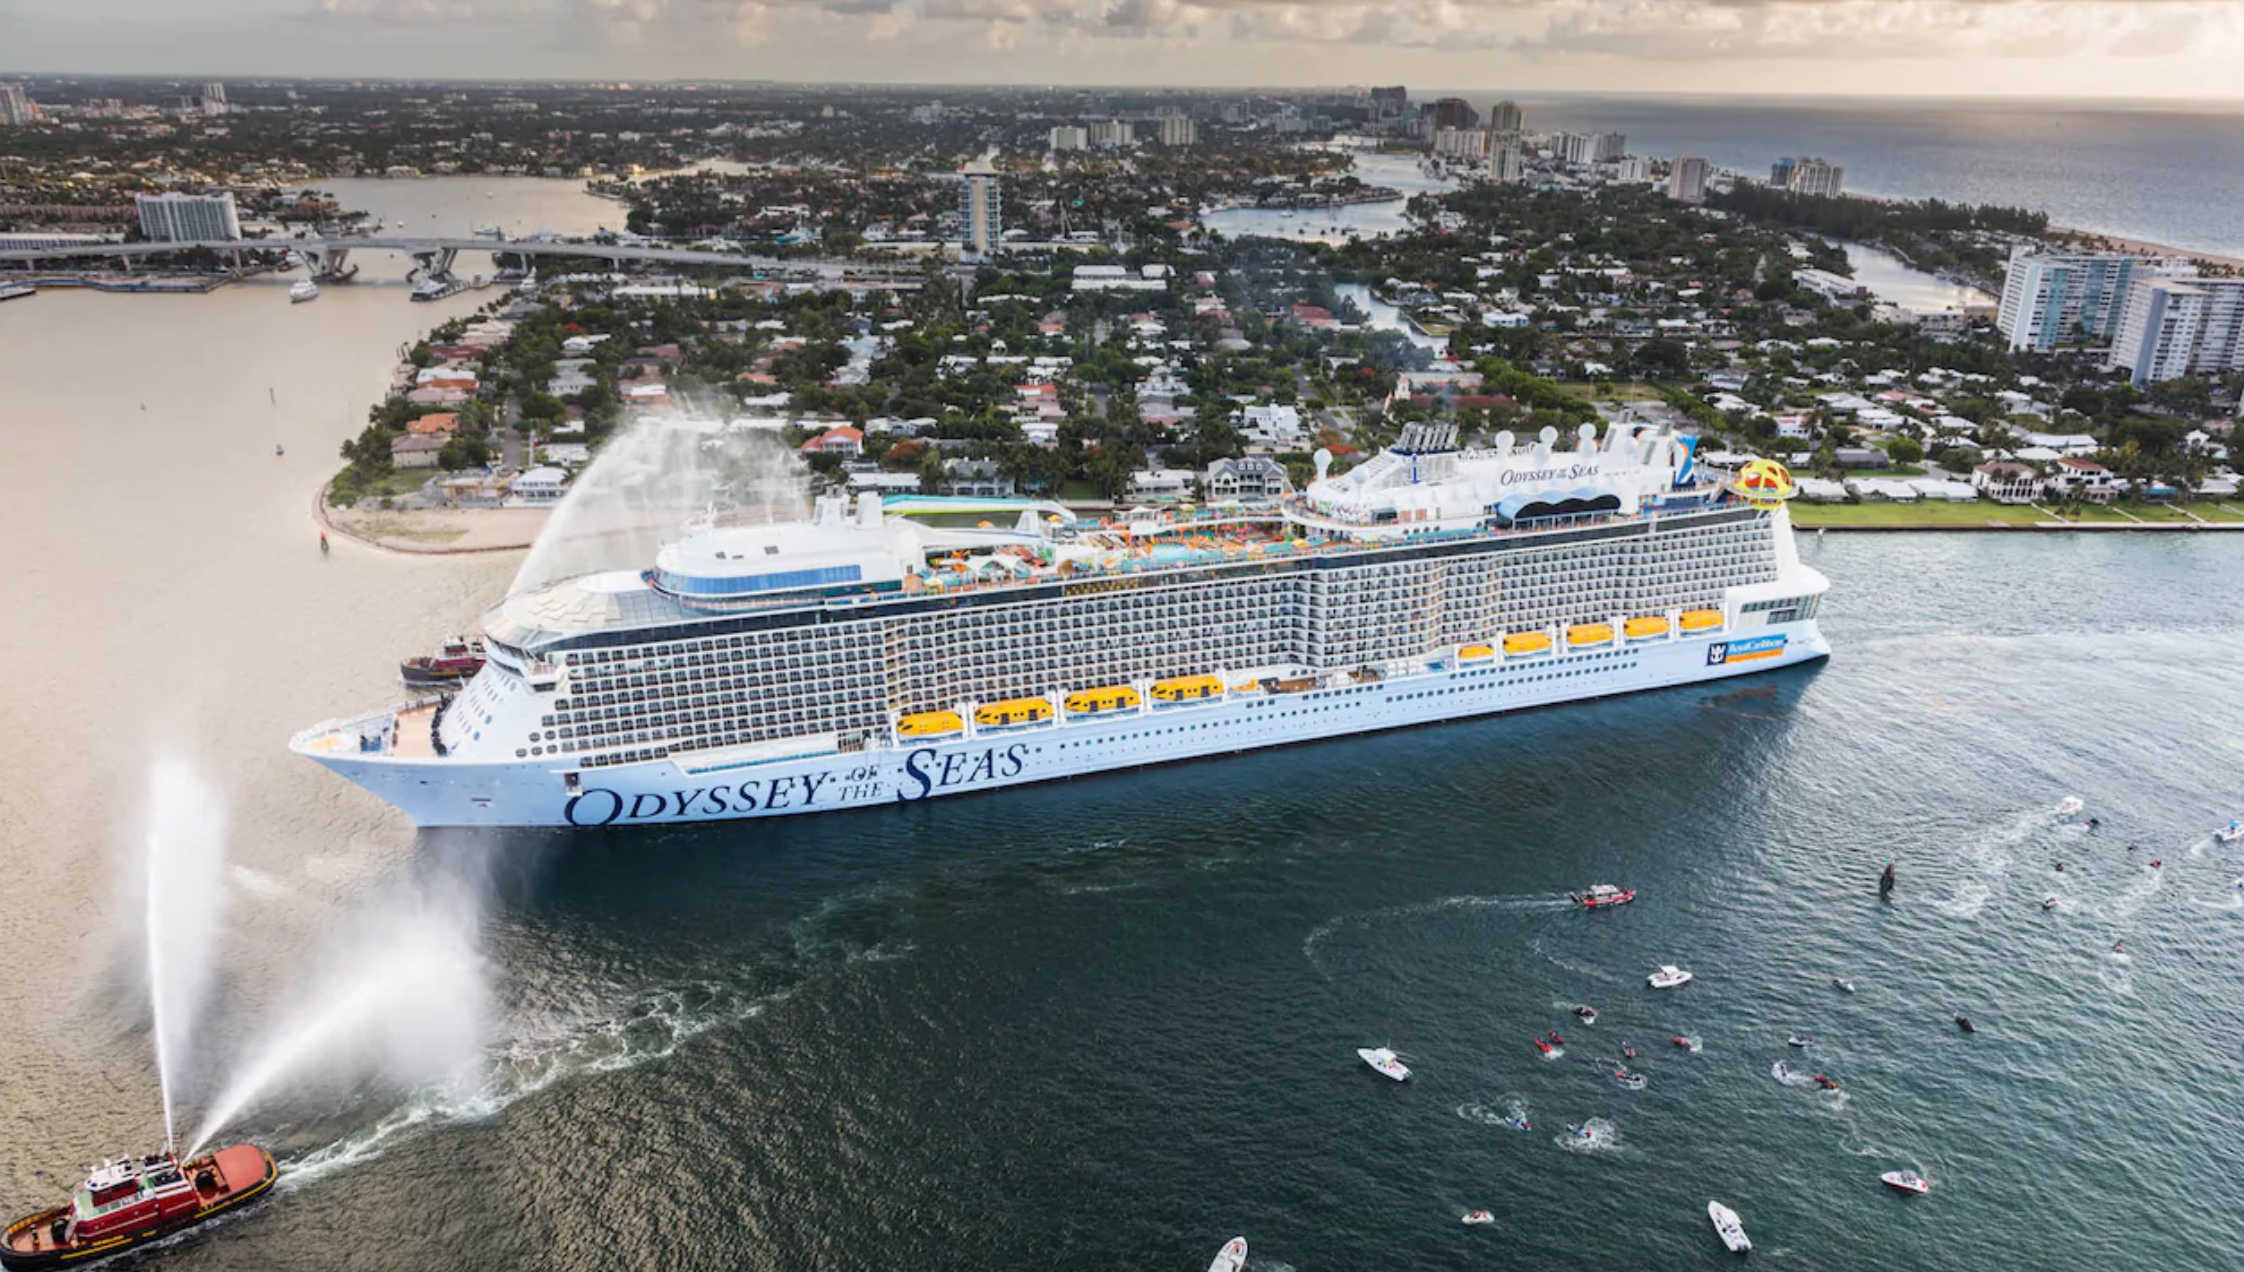 Port Authority Announces Inaugural Visit from Odyssey of the Seas